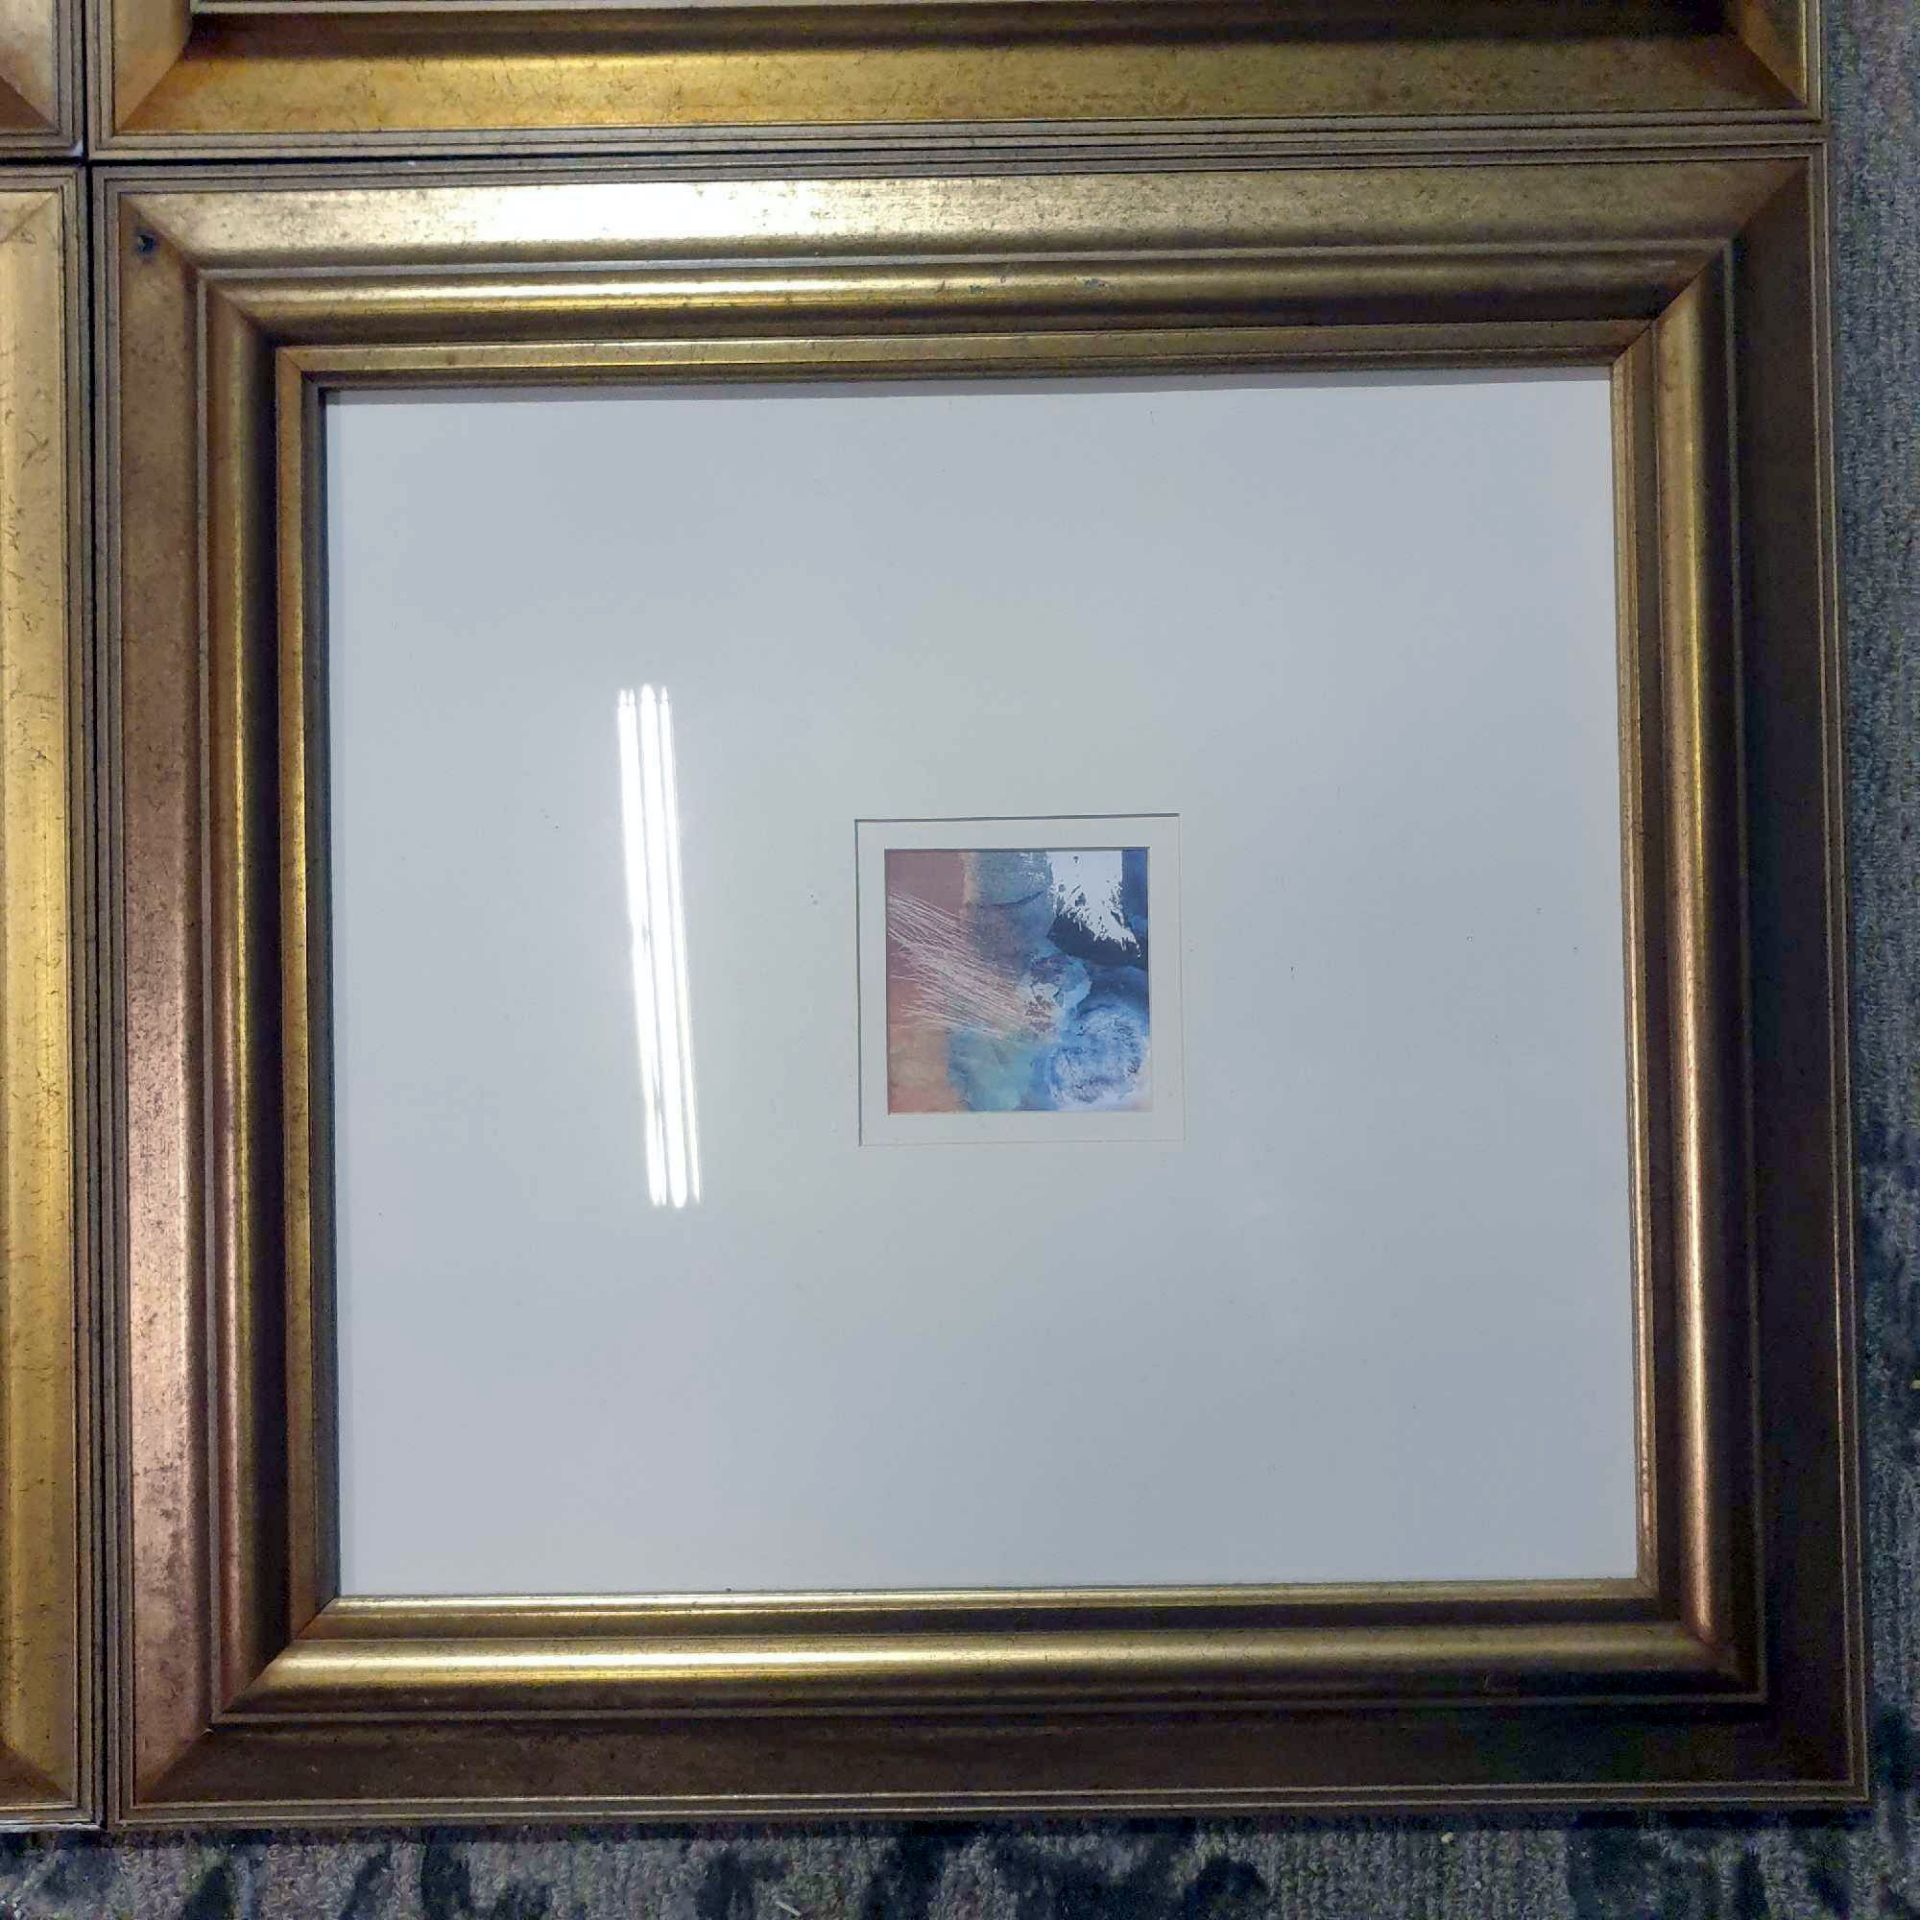 4 x Contemporary Framed And Glazed Prints 58 x 62cm - Image 5 of 7